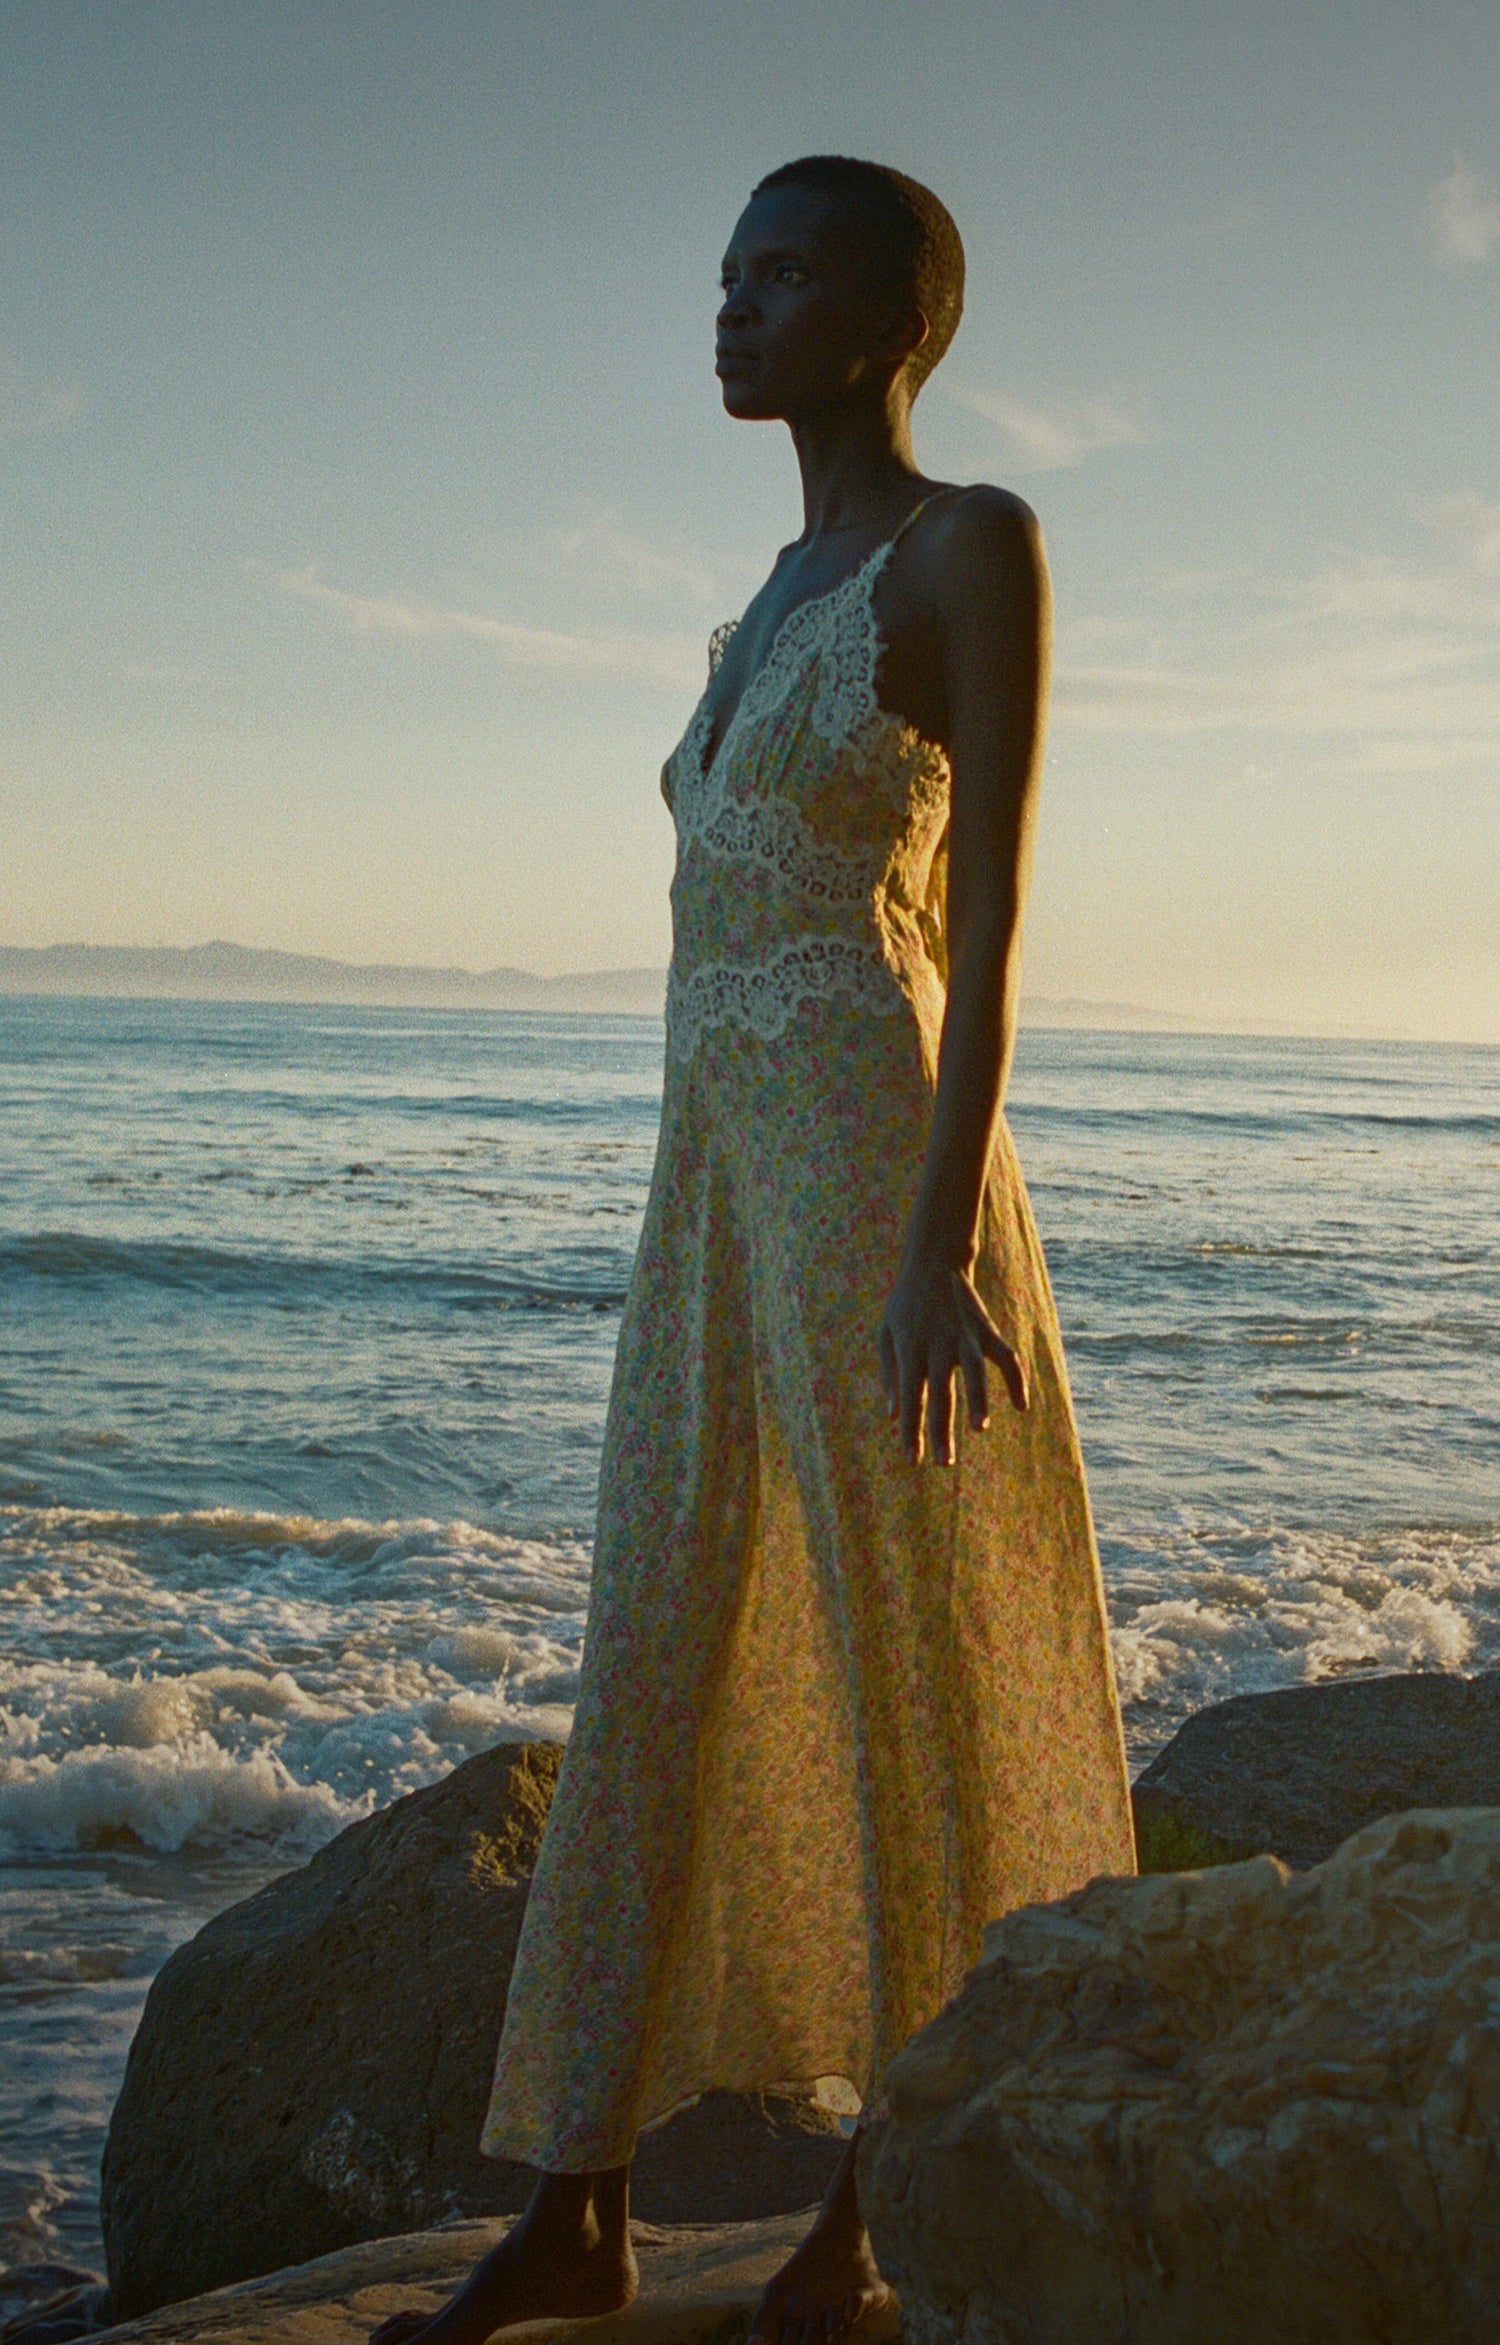 Timeless, vintage-inspired silhouettes inspired by the coastal California of decades past.